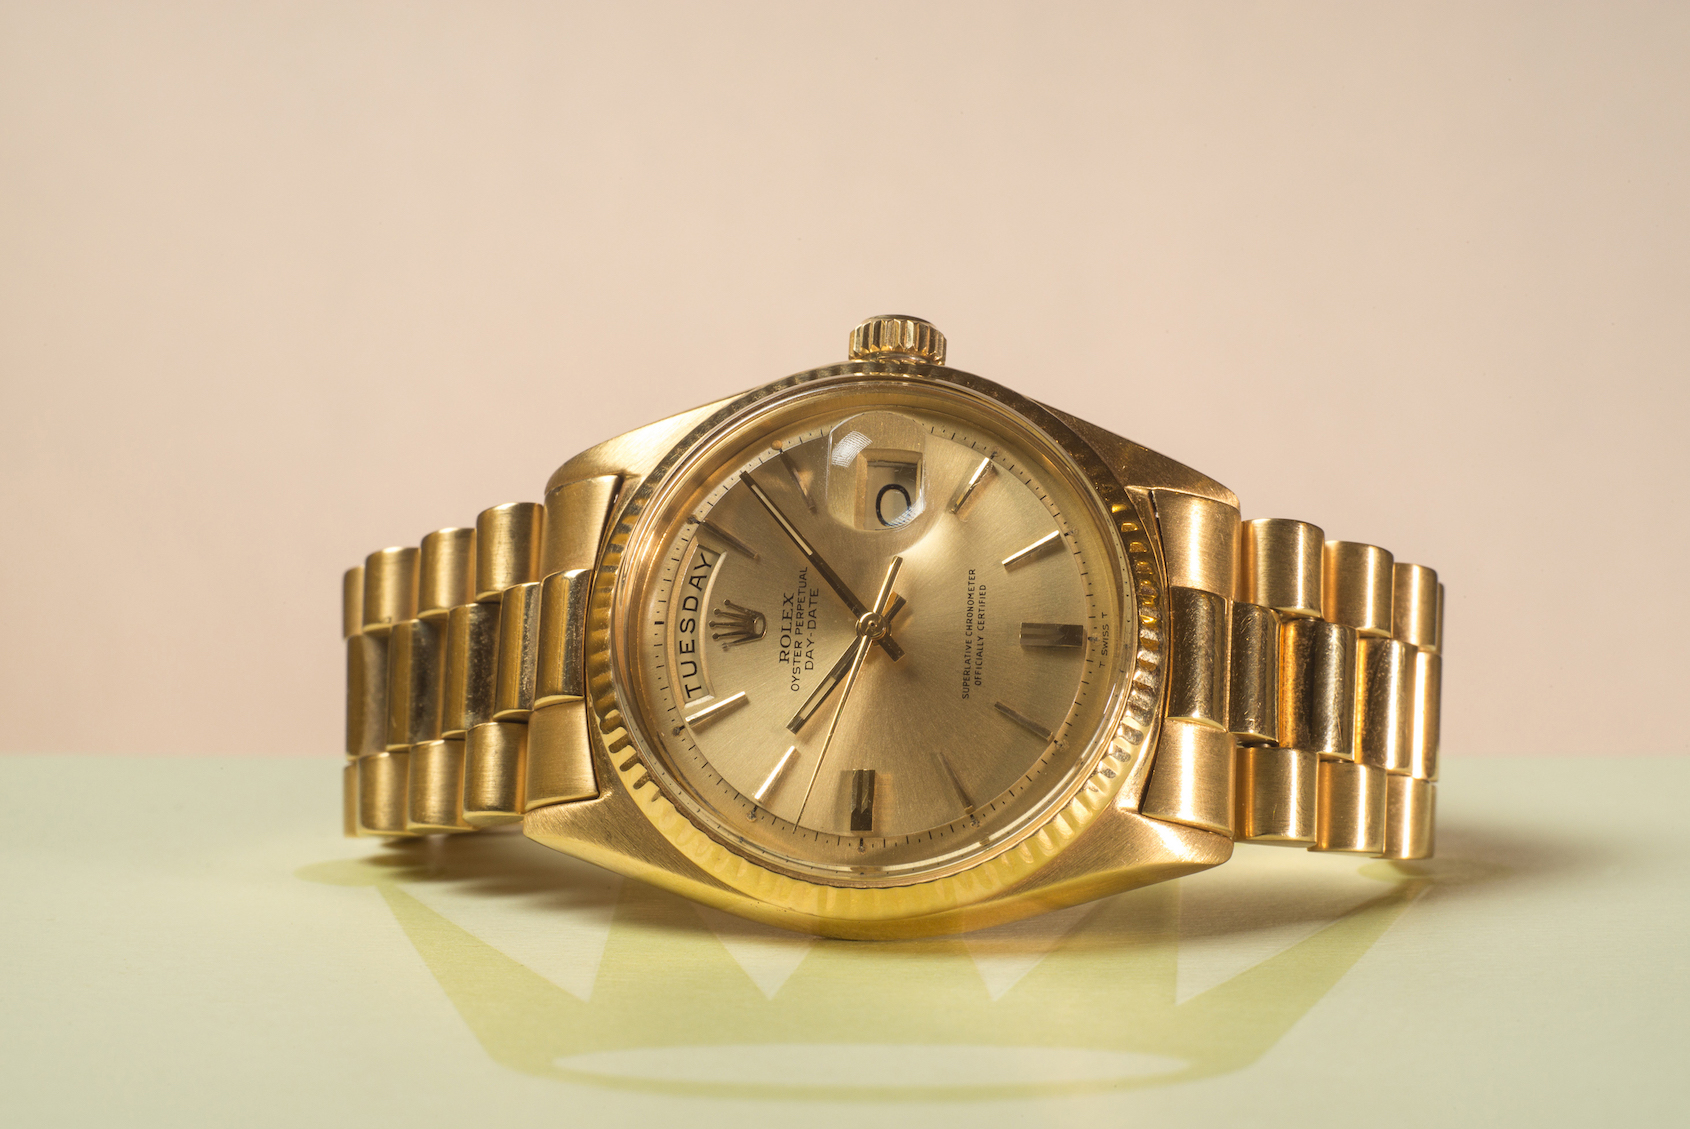 This is why a gold Rolex is still the most divisive watch on earth